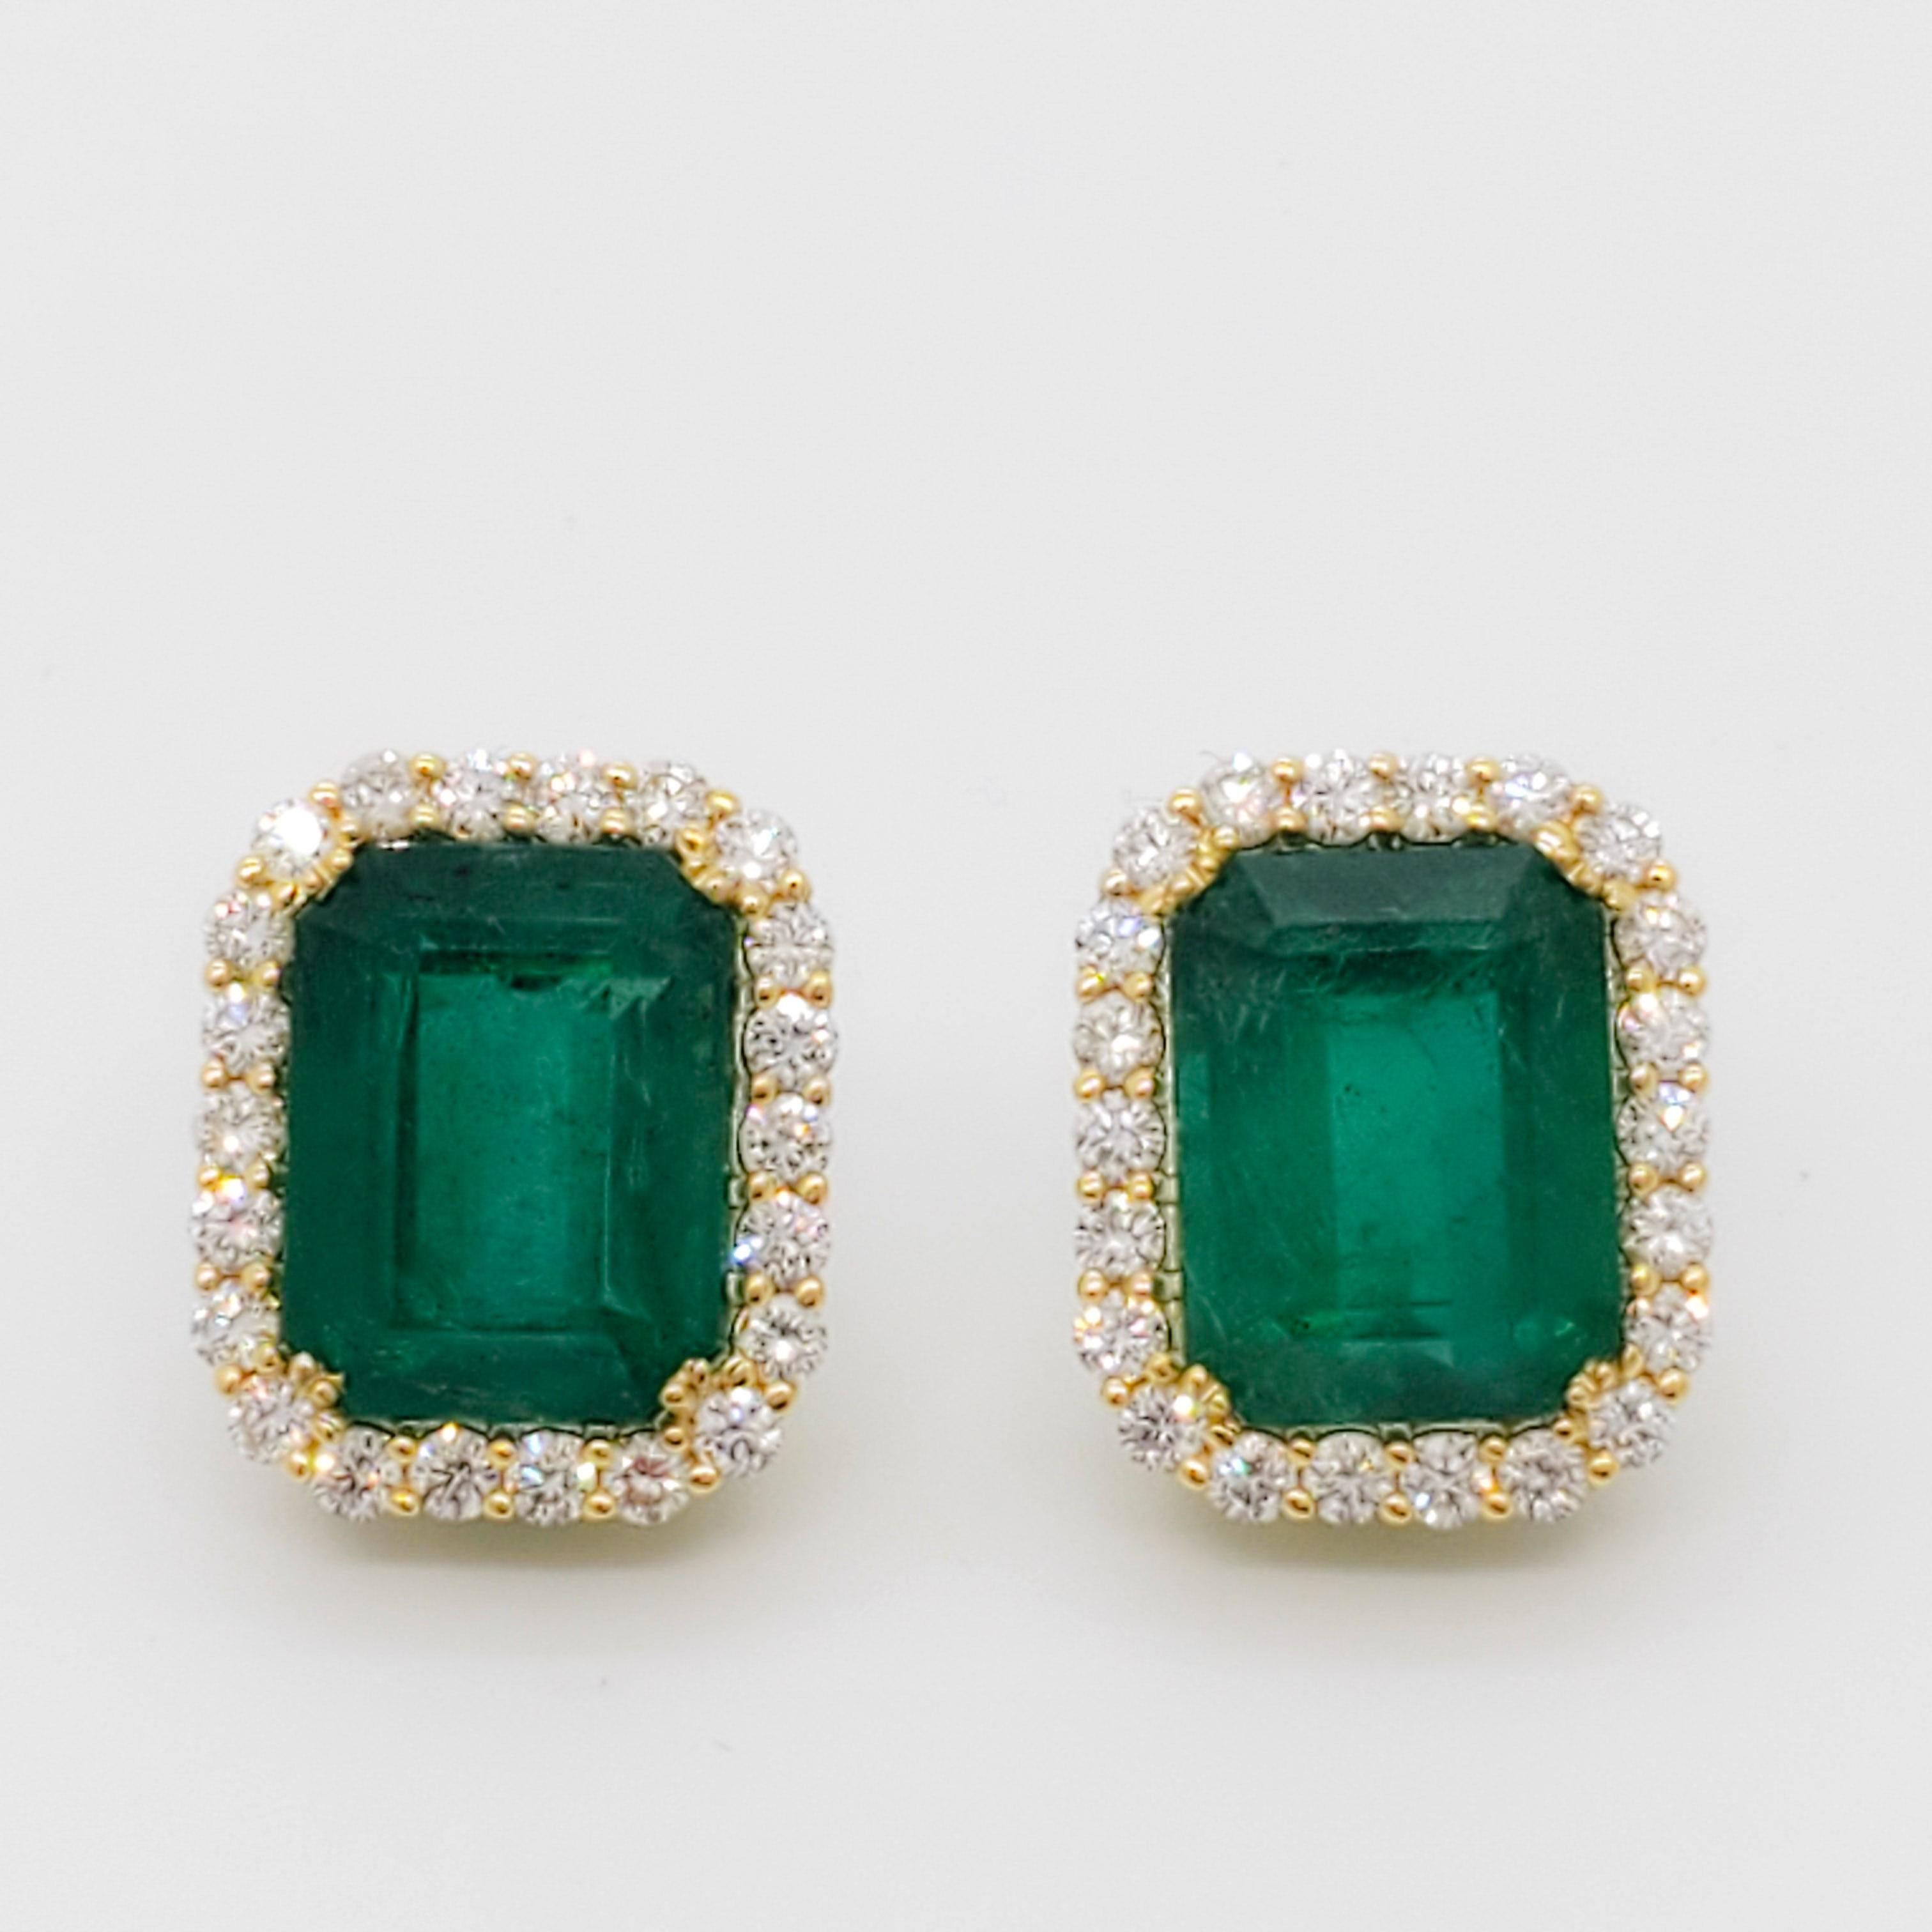 Breathtaking emerald emerald cuts weighing 14.96 ct. with 1.20 ct. good quality, white, and bright diamond rounds (total 44 stones).  Handmade in 18k yellow gold.  These earrings are versatile, chic, and a smart investment.